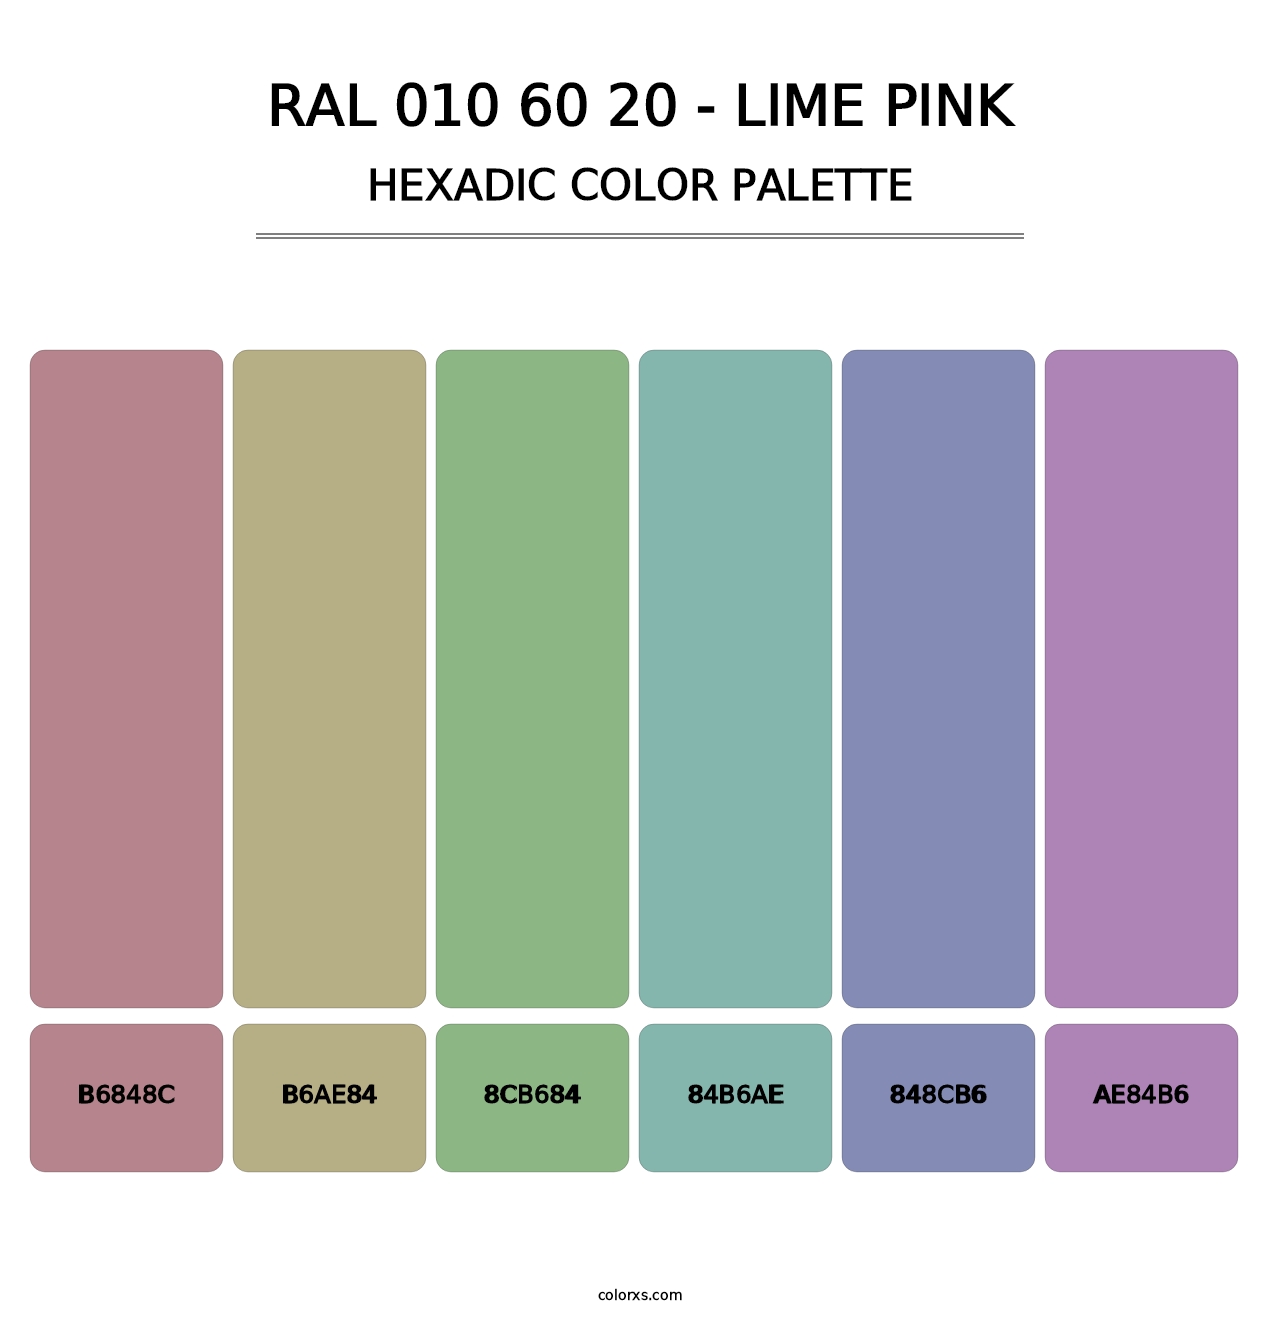 RAL 010 60 20 - Lime Pink - Hexadic Color Palette